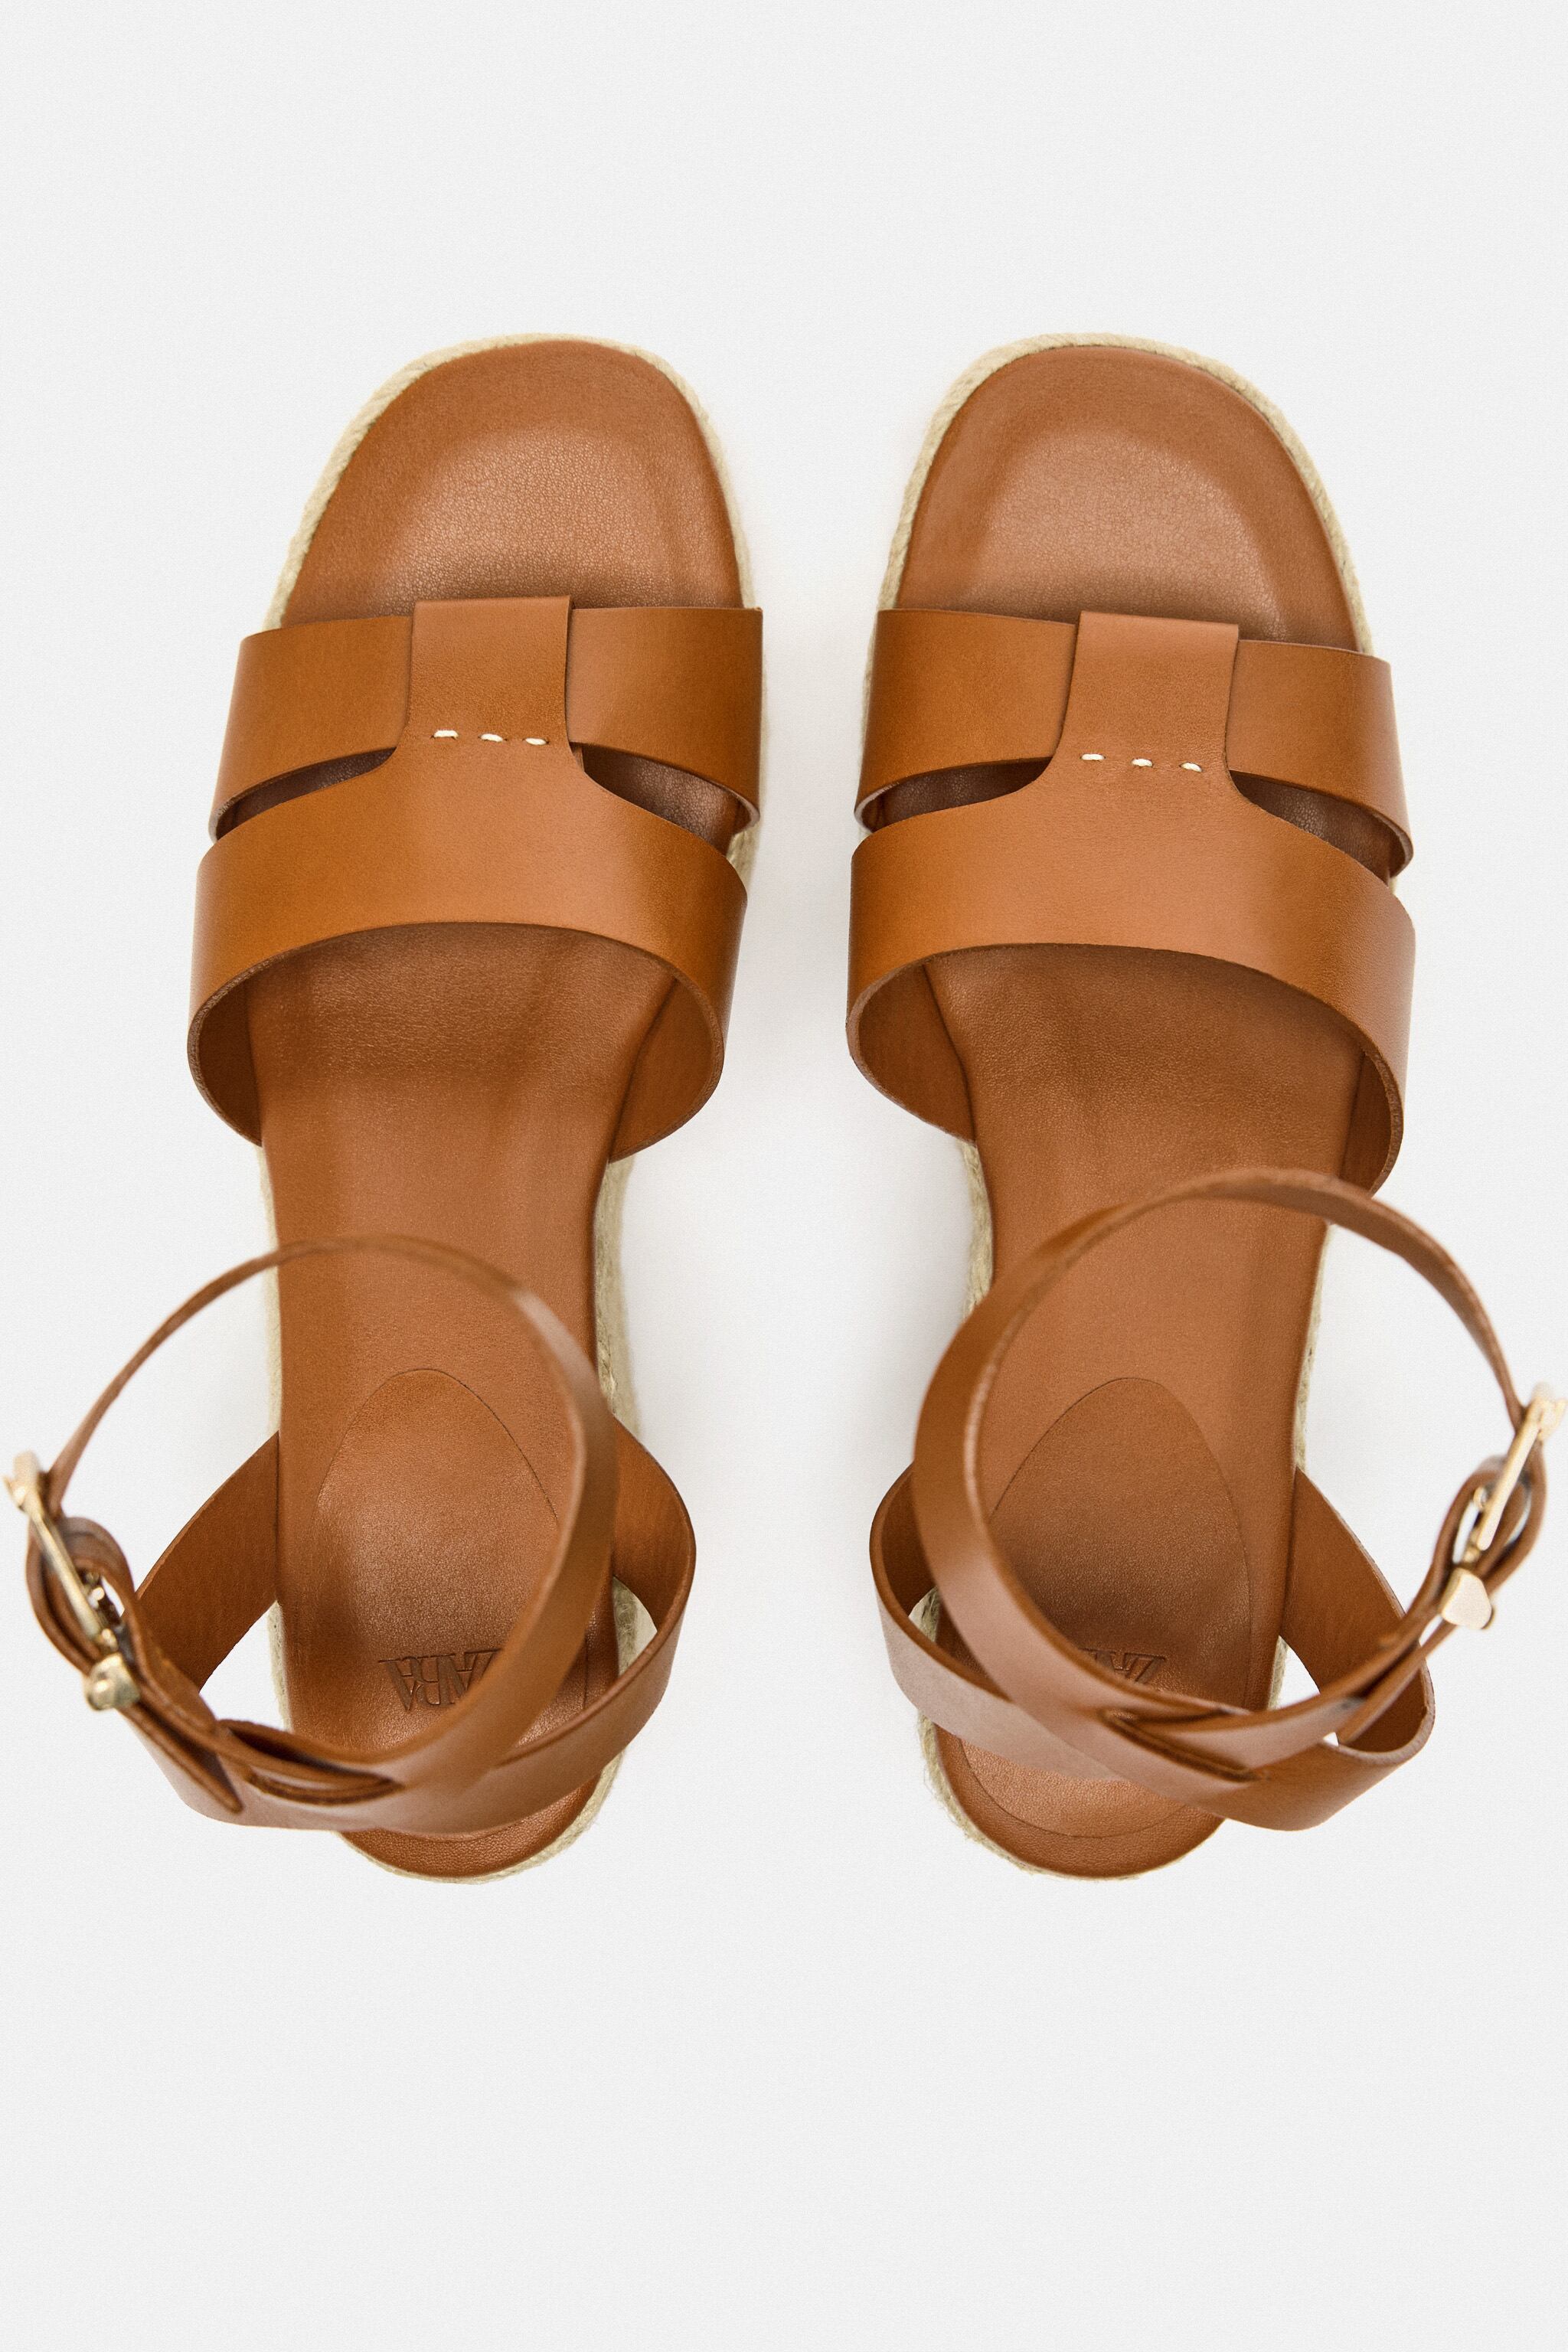 LEATHER WEDGE SANDALS